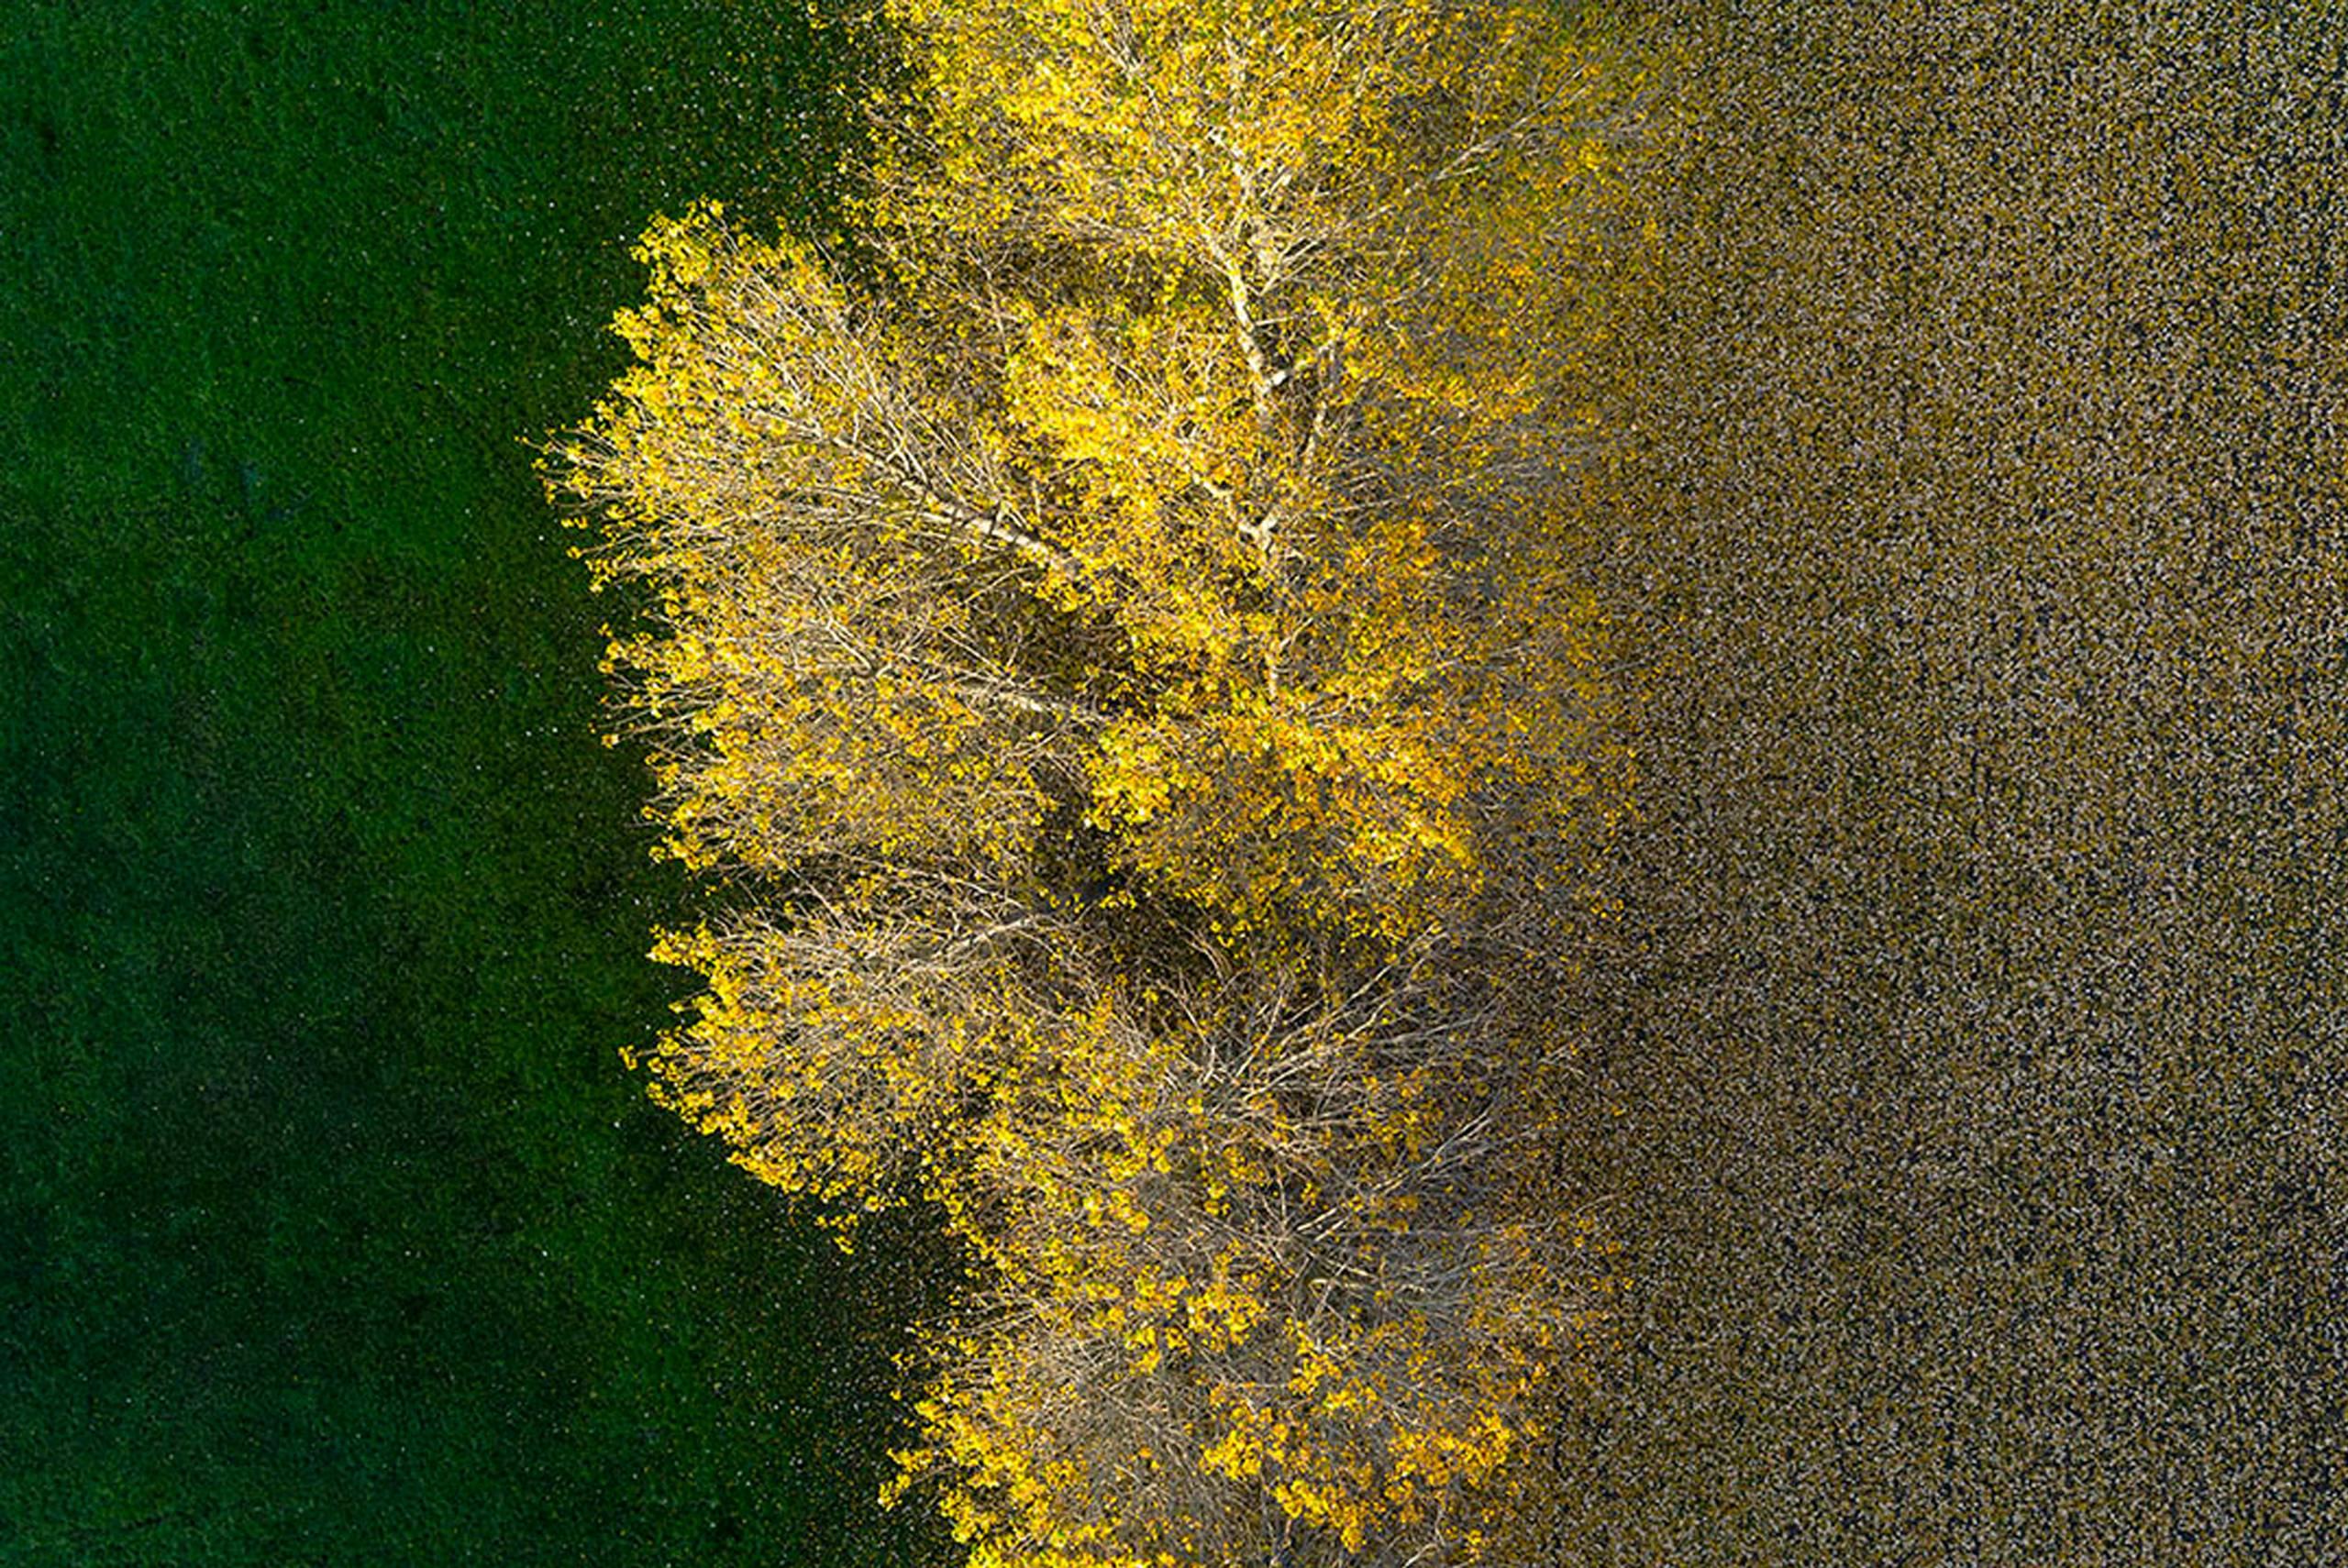 With his bird's eye view, Kowalski offers a new perspective on the traditional landscape, distilling his subjects down to their primary form, color, and texture. Under his omniscient eye, fall foliage becomes a pointillist's dream, and environmental